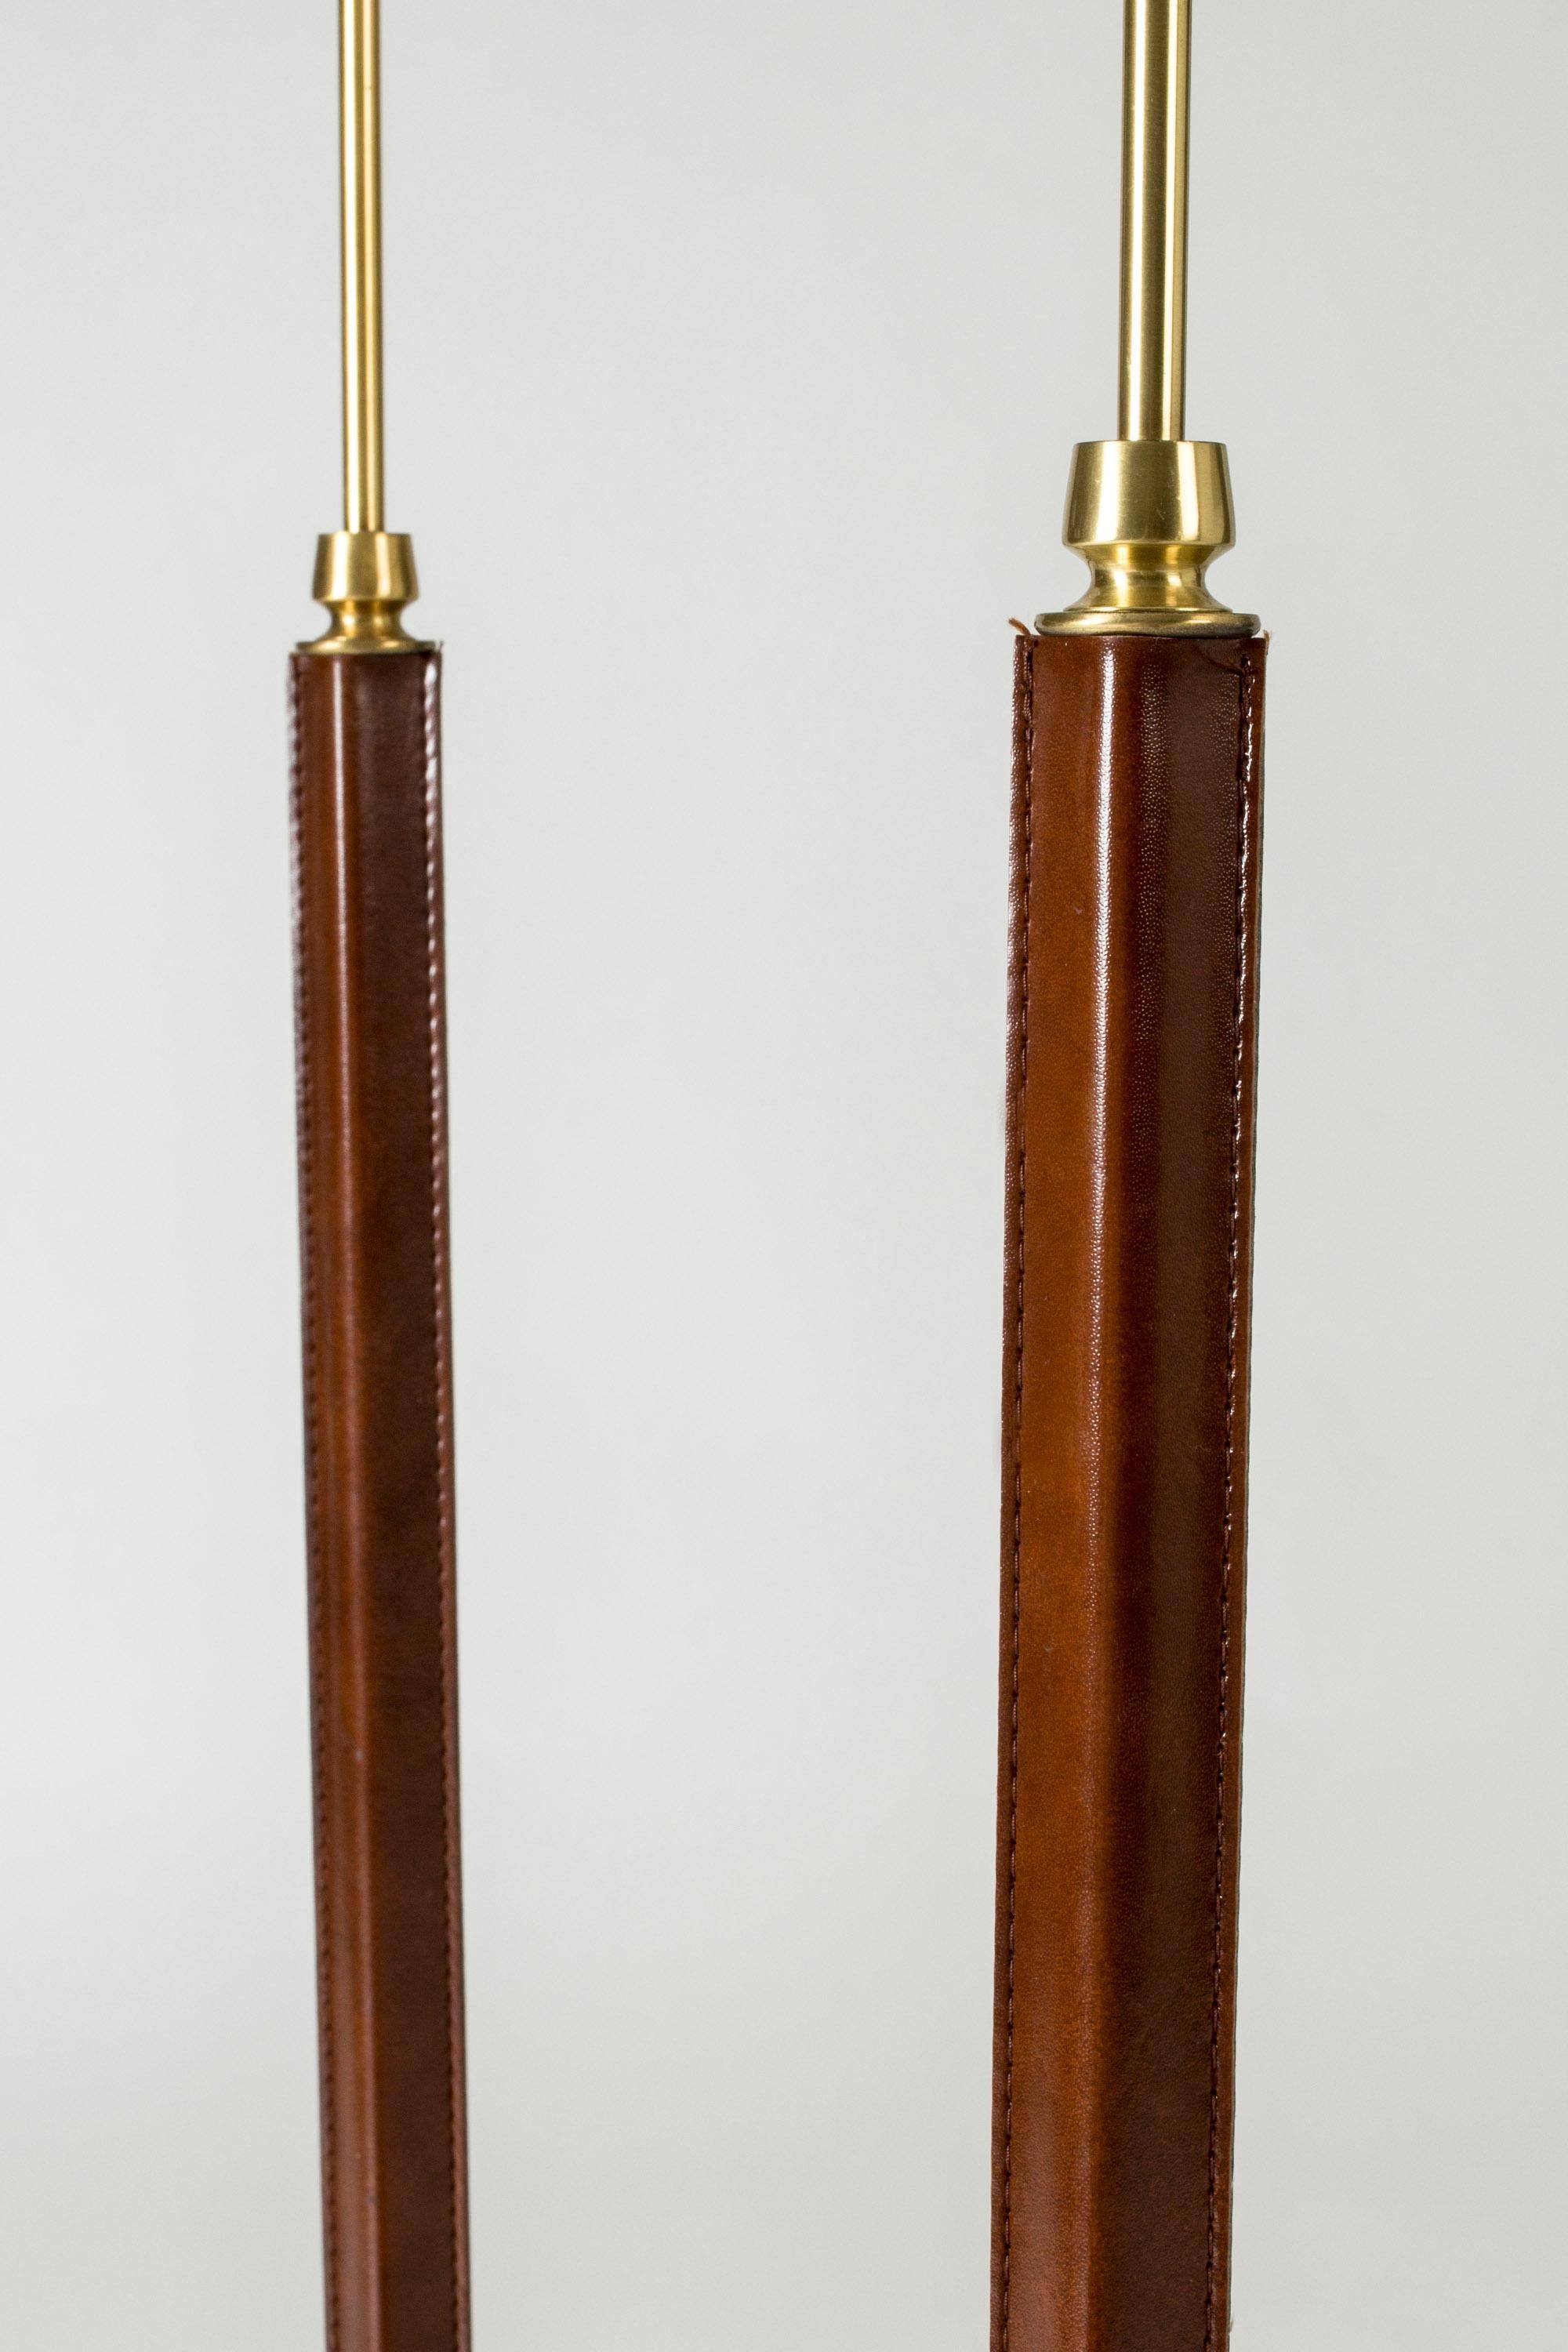 Swedish Pair of Floor Lamps from Falkenbergs Belysning, Sweden, 1960s